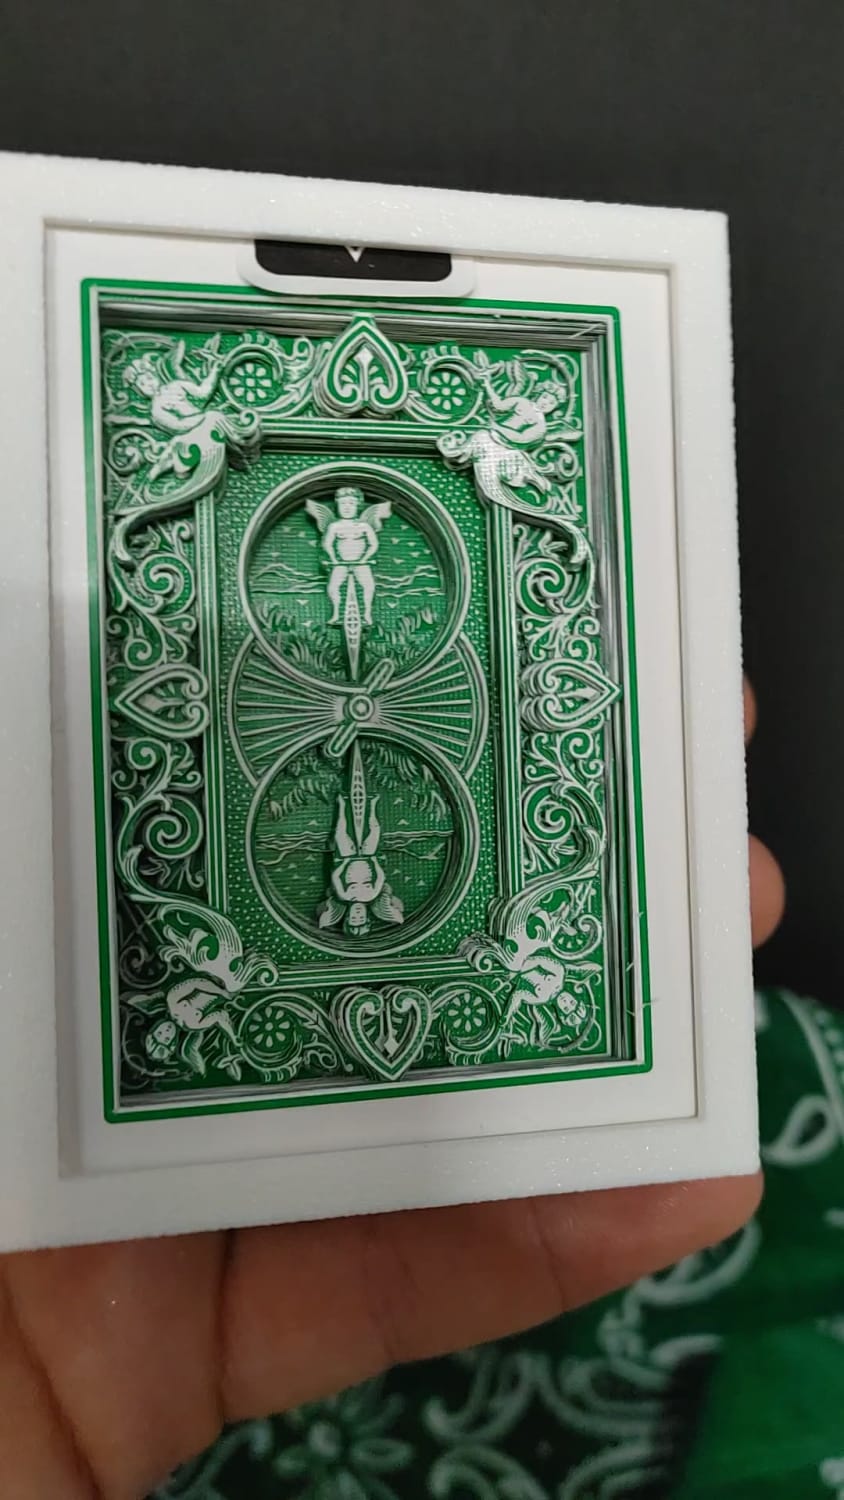 I cut bicycle playing cards into art with an xacto knife. This is the second time I have cut this color and it is by far my most detailed piece yet.